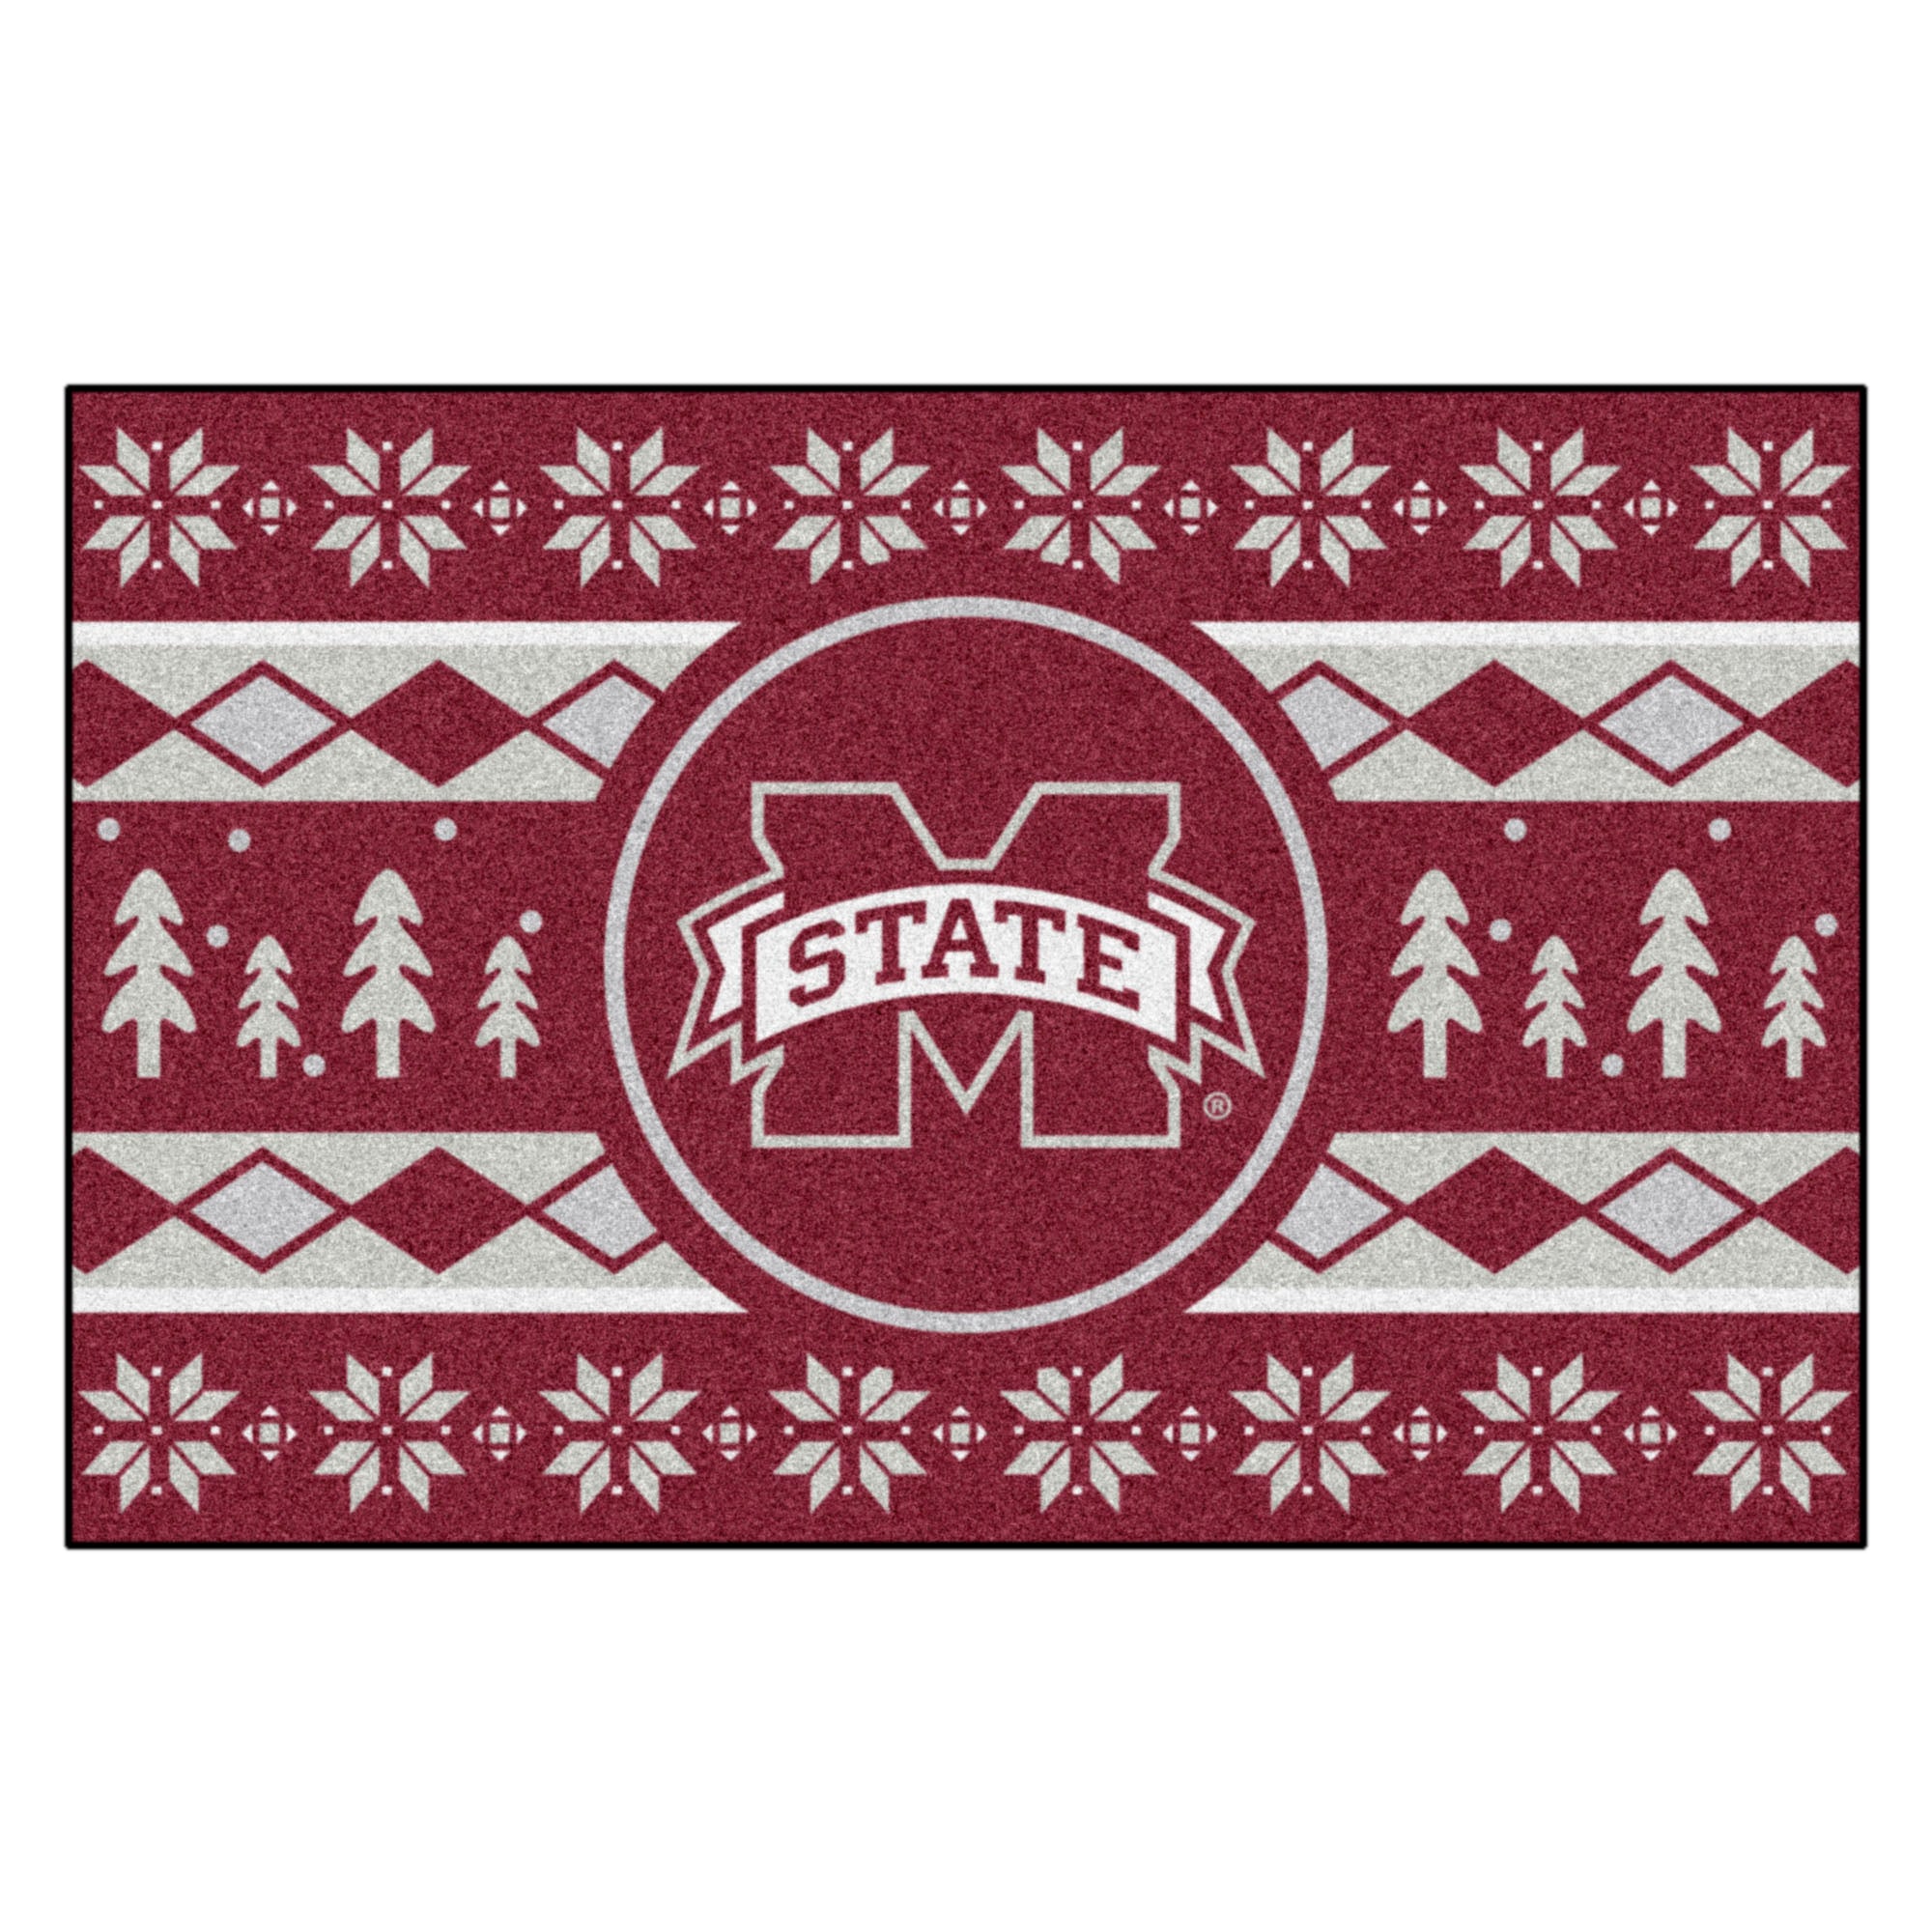 FANMATS, Mississippi State University Holiday Sweater Rug - 19in. x 30in.